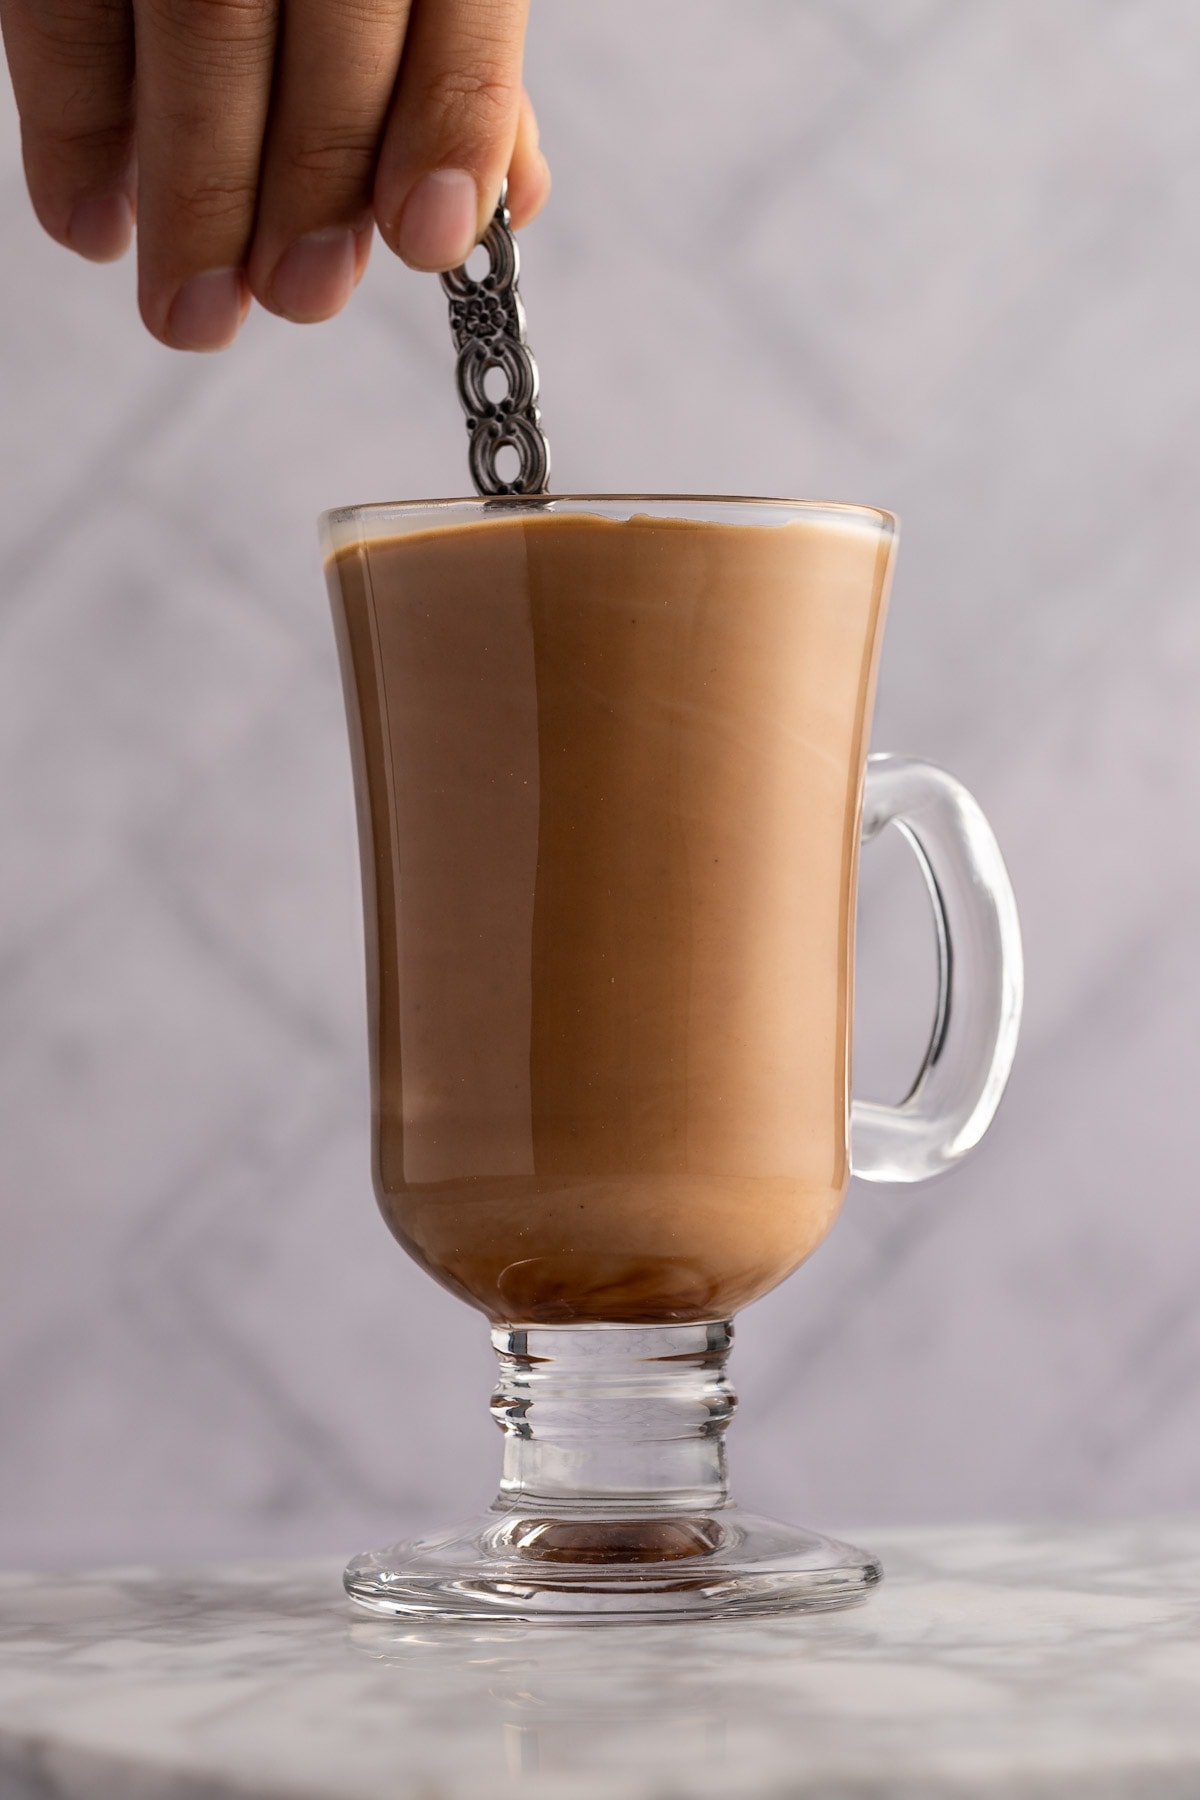 A hand using a spoon to stir the mocha latte ingredients together, with a white background.